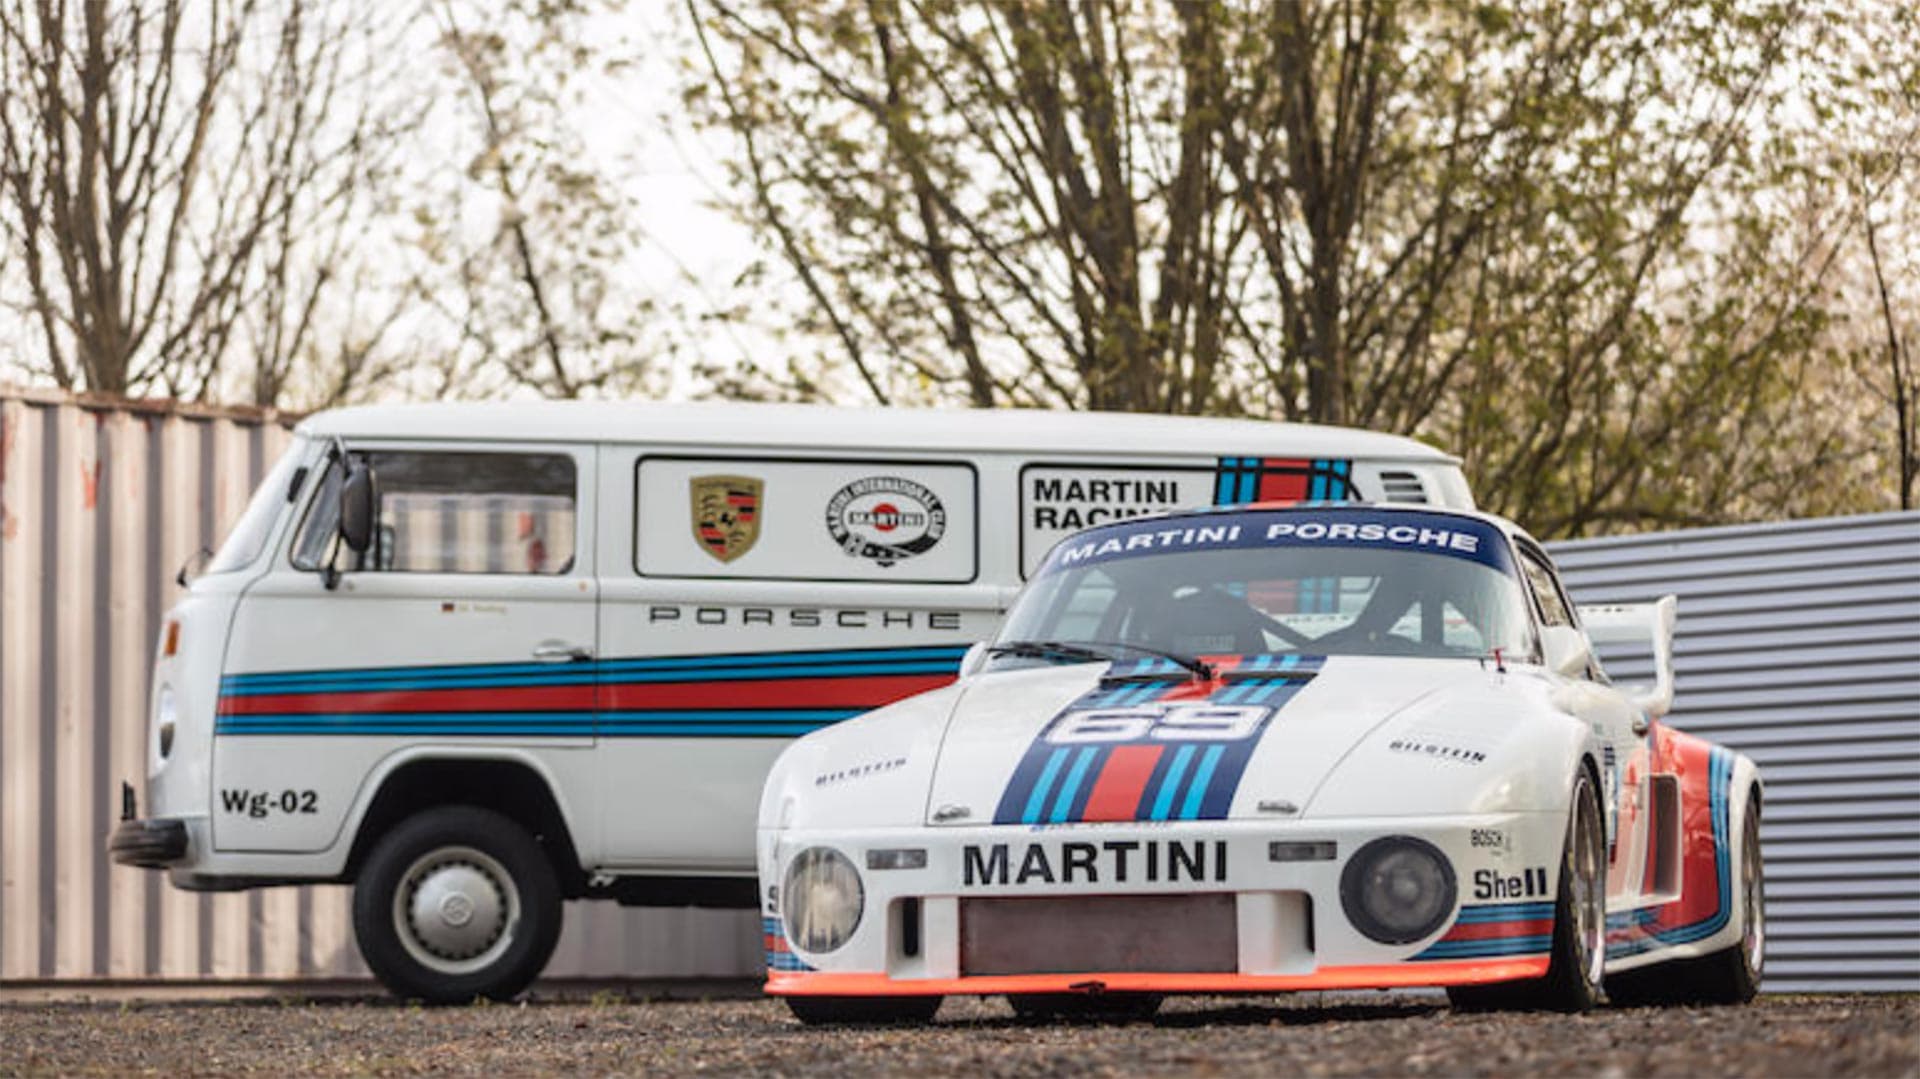 Beautiful Martini Livery Porsche 934/5 and Volkswagen T2 Transporter Go Up For Auction